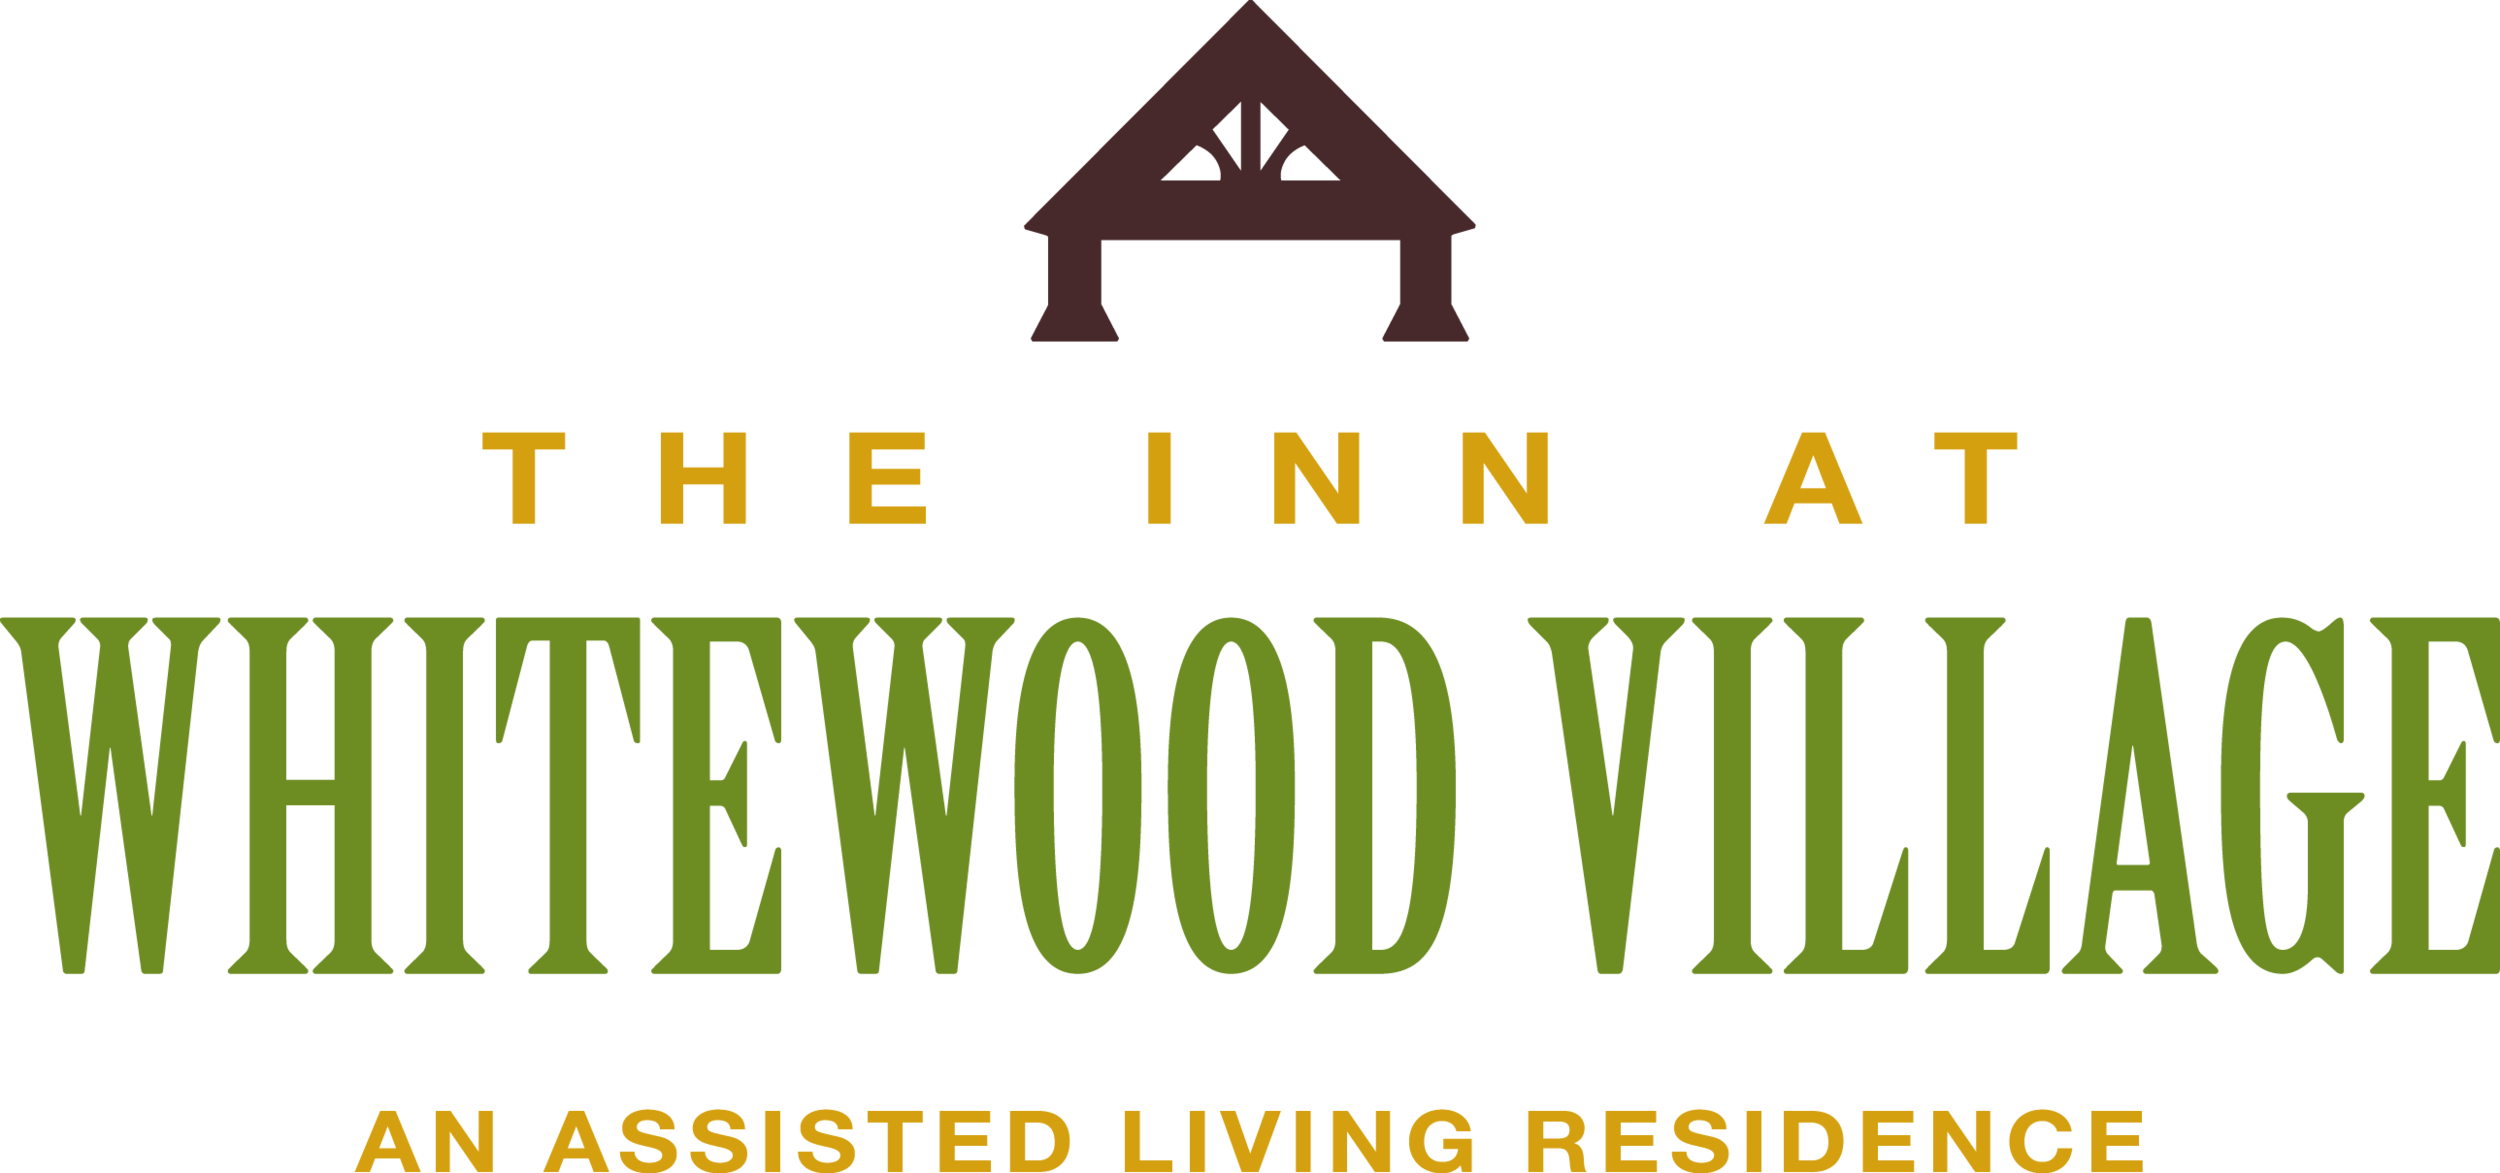 Assisted Living at The Inn At Whitewood Village